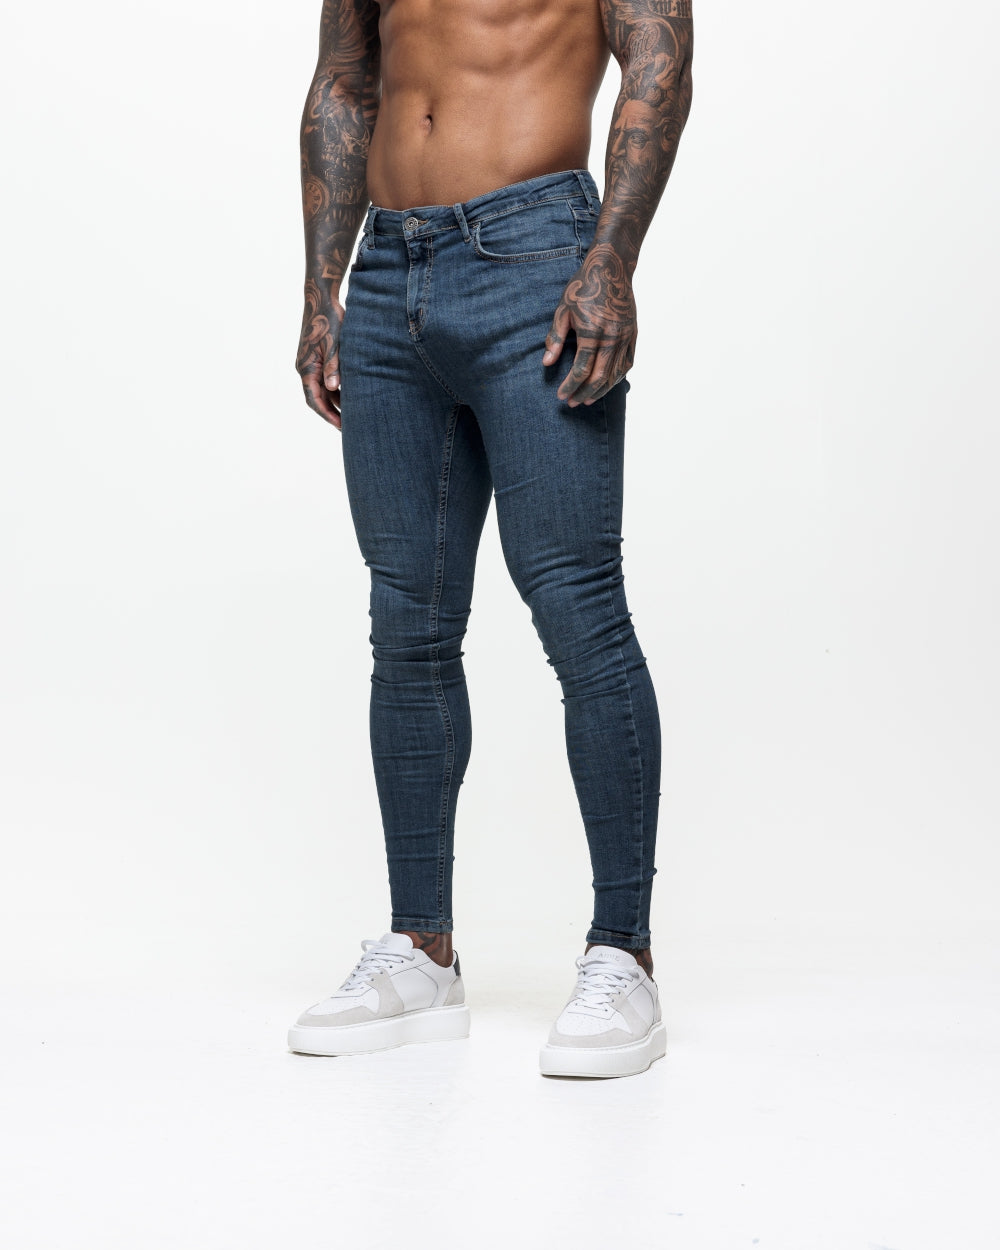 Super Skinny Spray On Jeans - Vintage Blue Non Ripped - Nimes